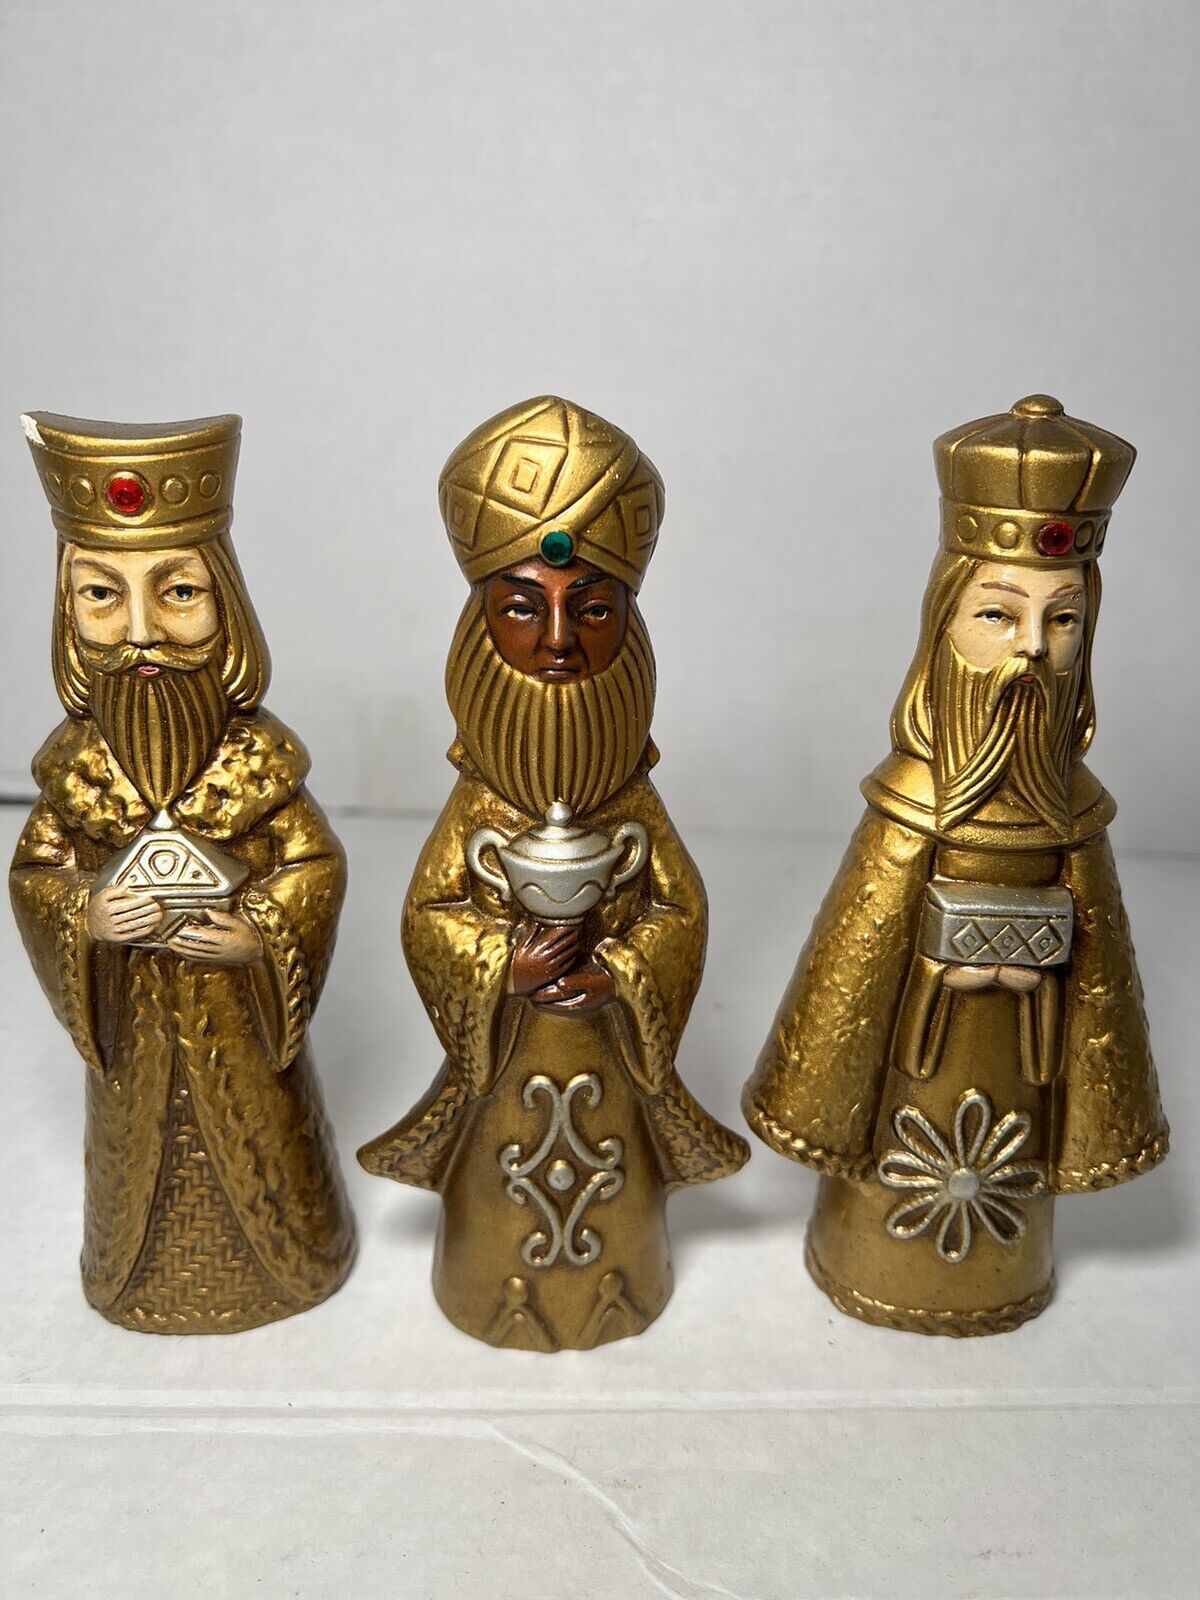 VTG 3 Three Kings Wise Men Christmas Nativity Figures Statues Gold Tones 6” Tall